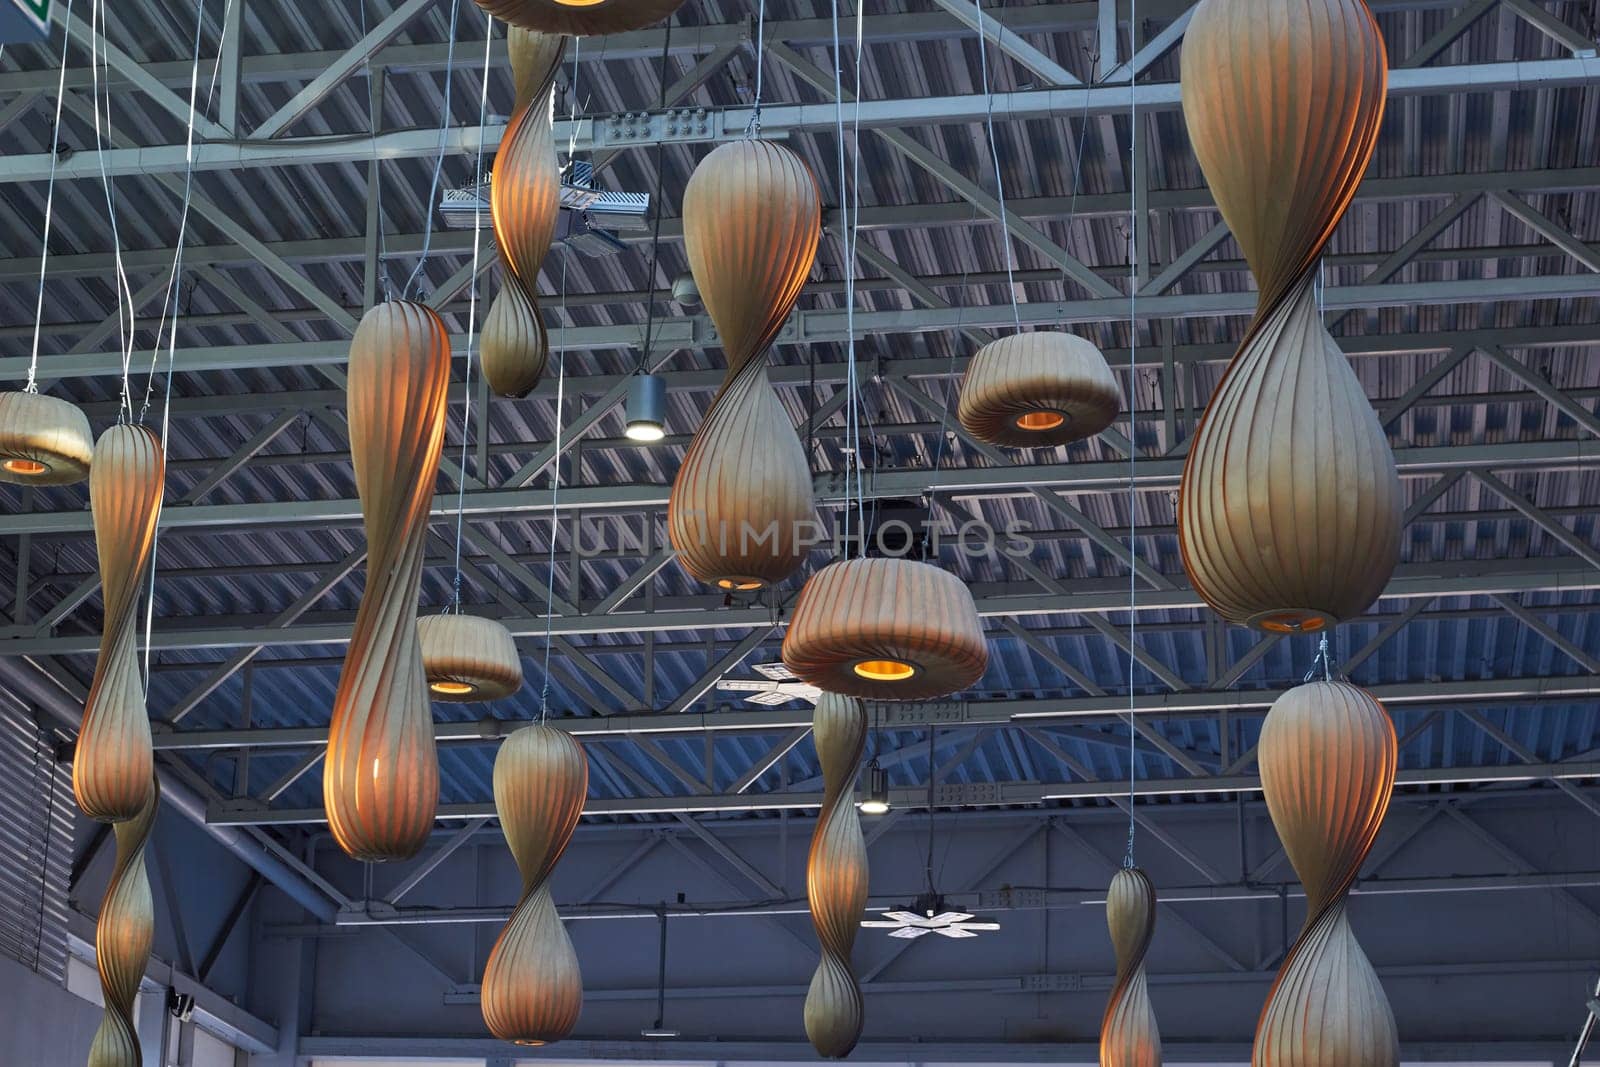 Large wooden lamps hanging from the ceiling. Metal Ceiling of the shopping center. Lighting of shops.